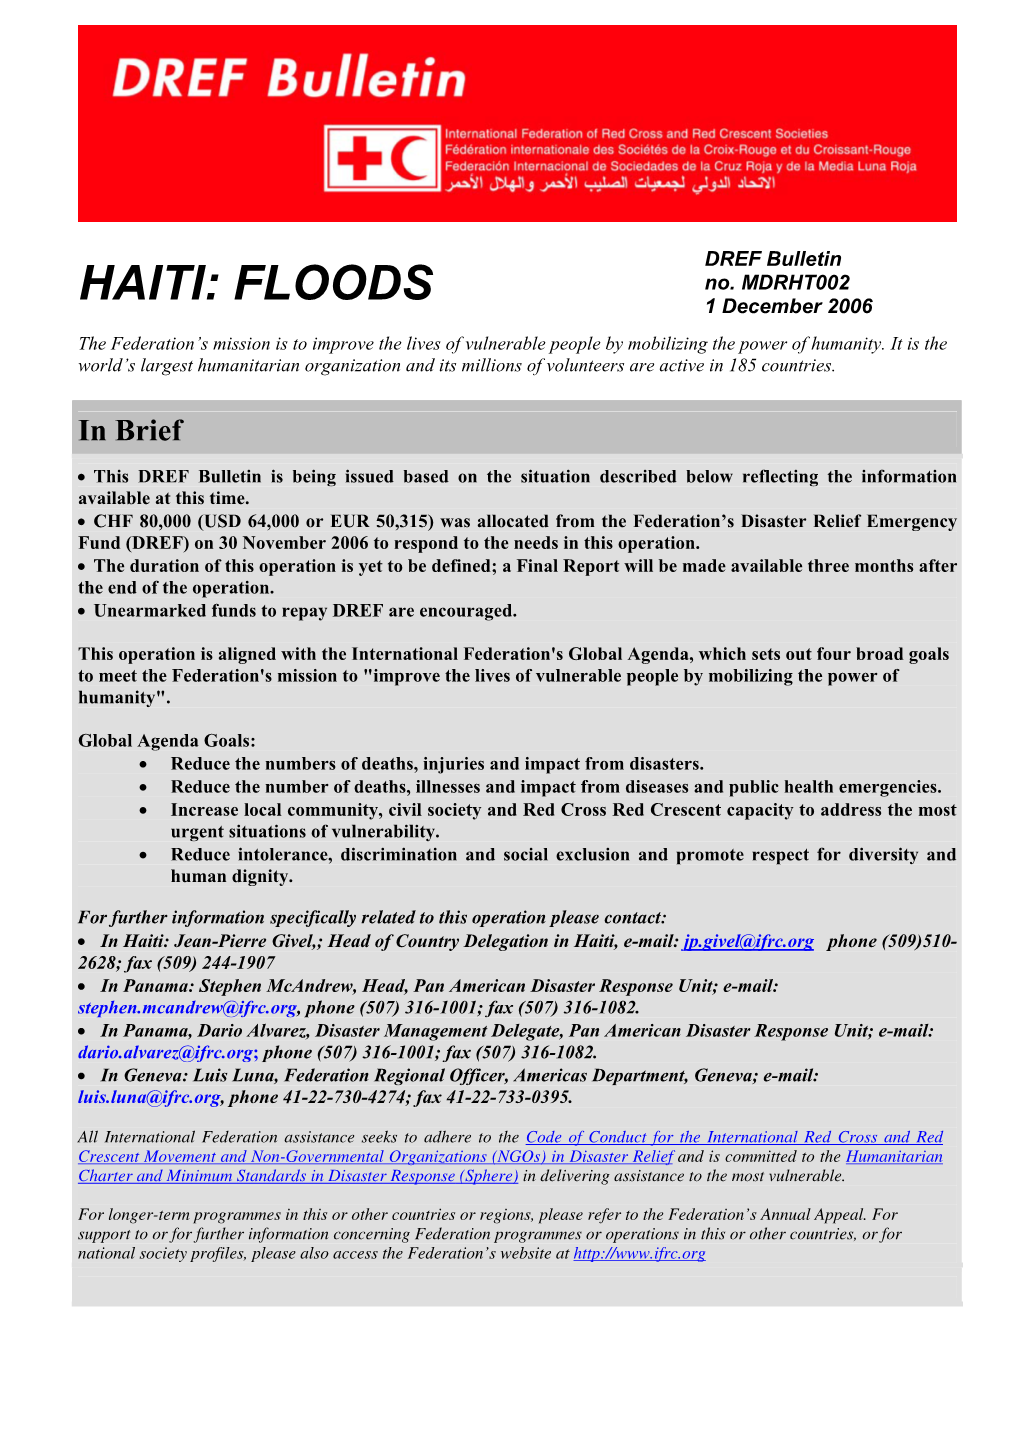 HAITI: FLOODS 1 December 2006 the Federation’S Mission Is to Improve the Lives of Vulnerable People by Mobilizing the Power of Humanity